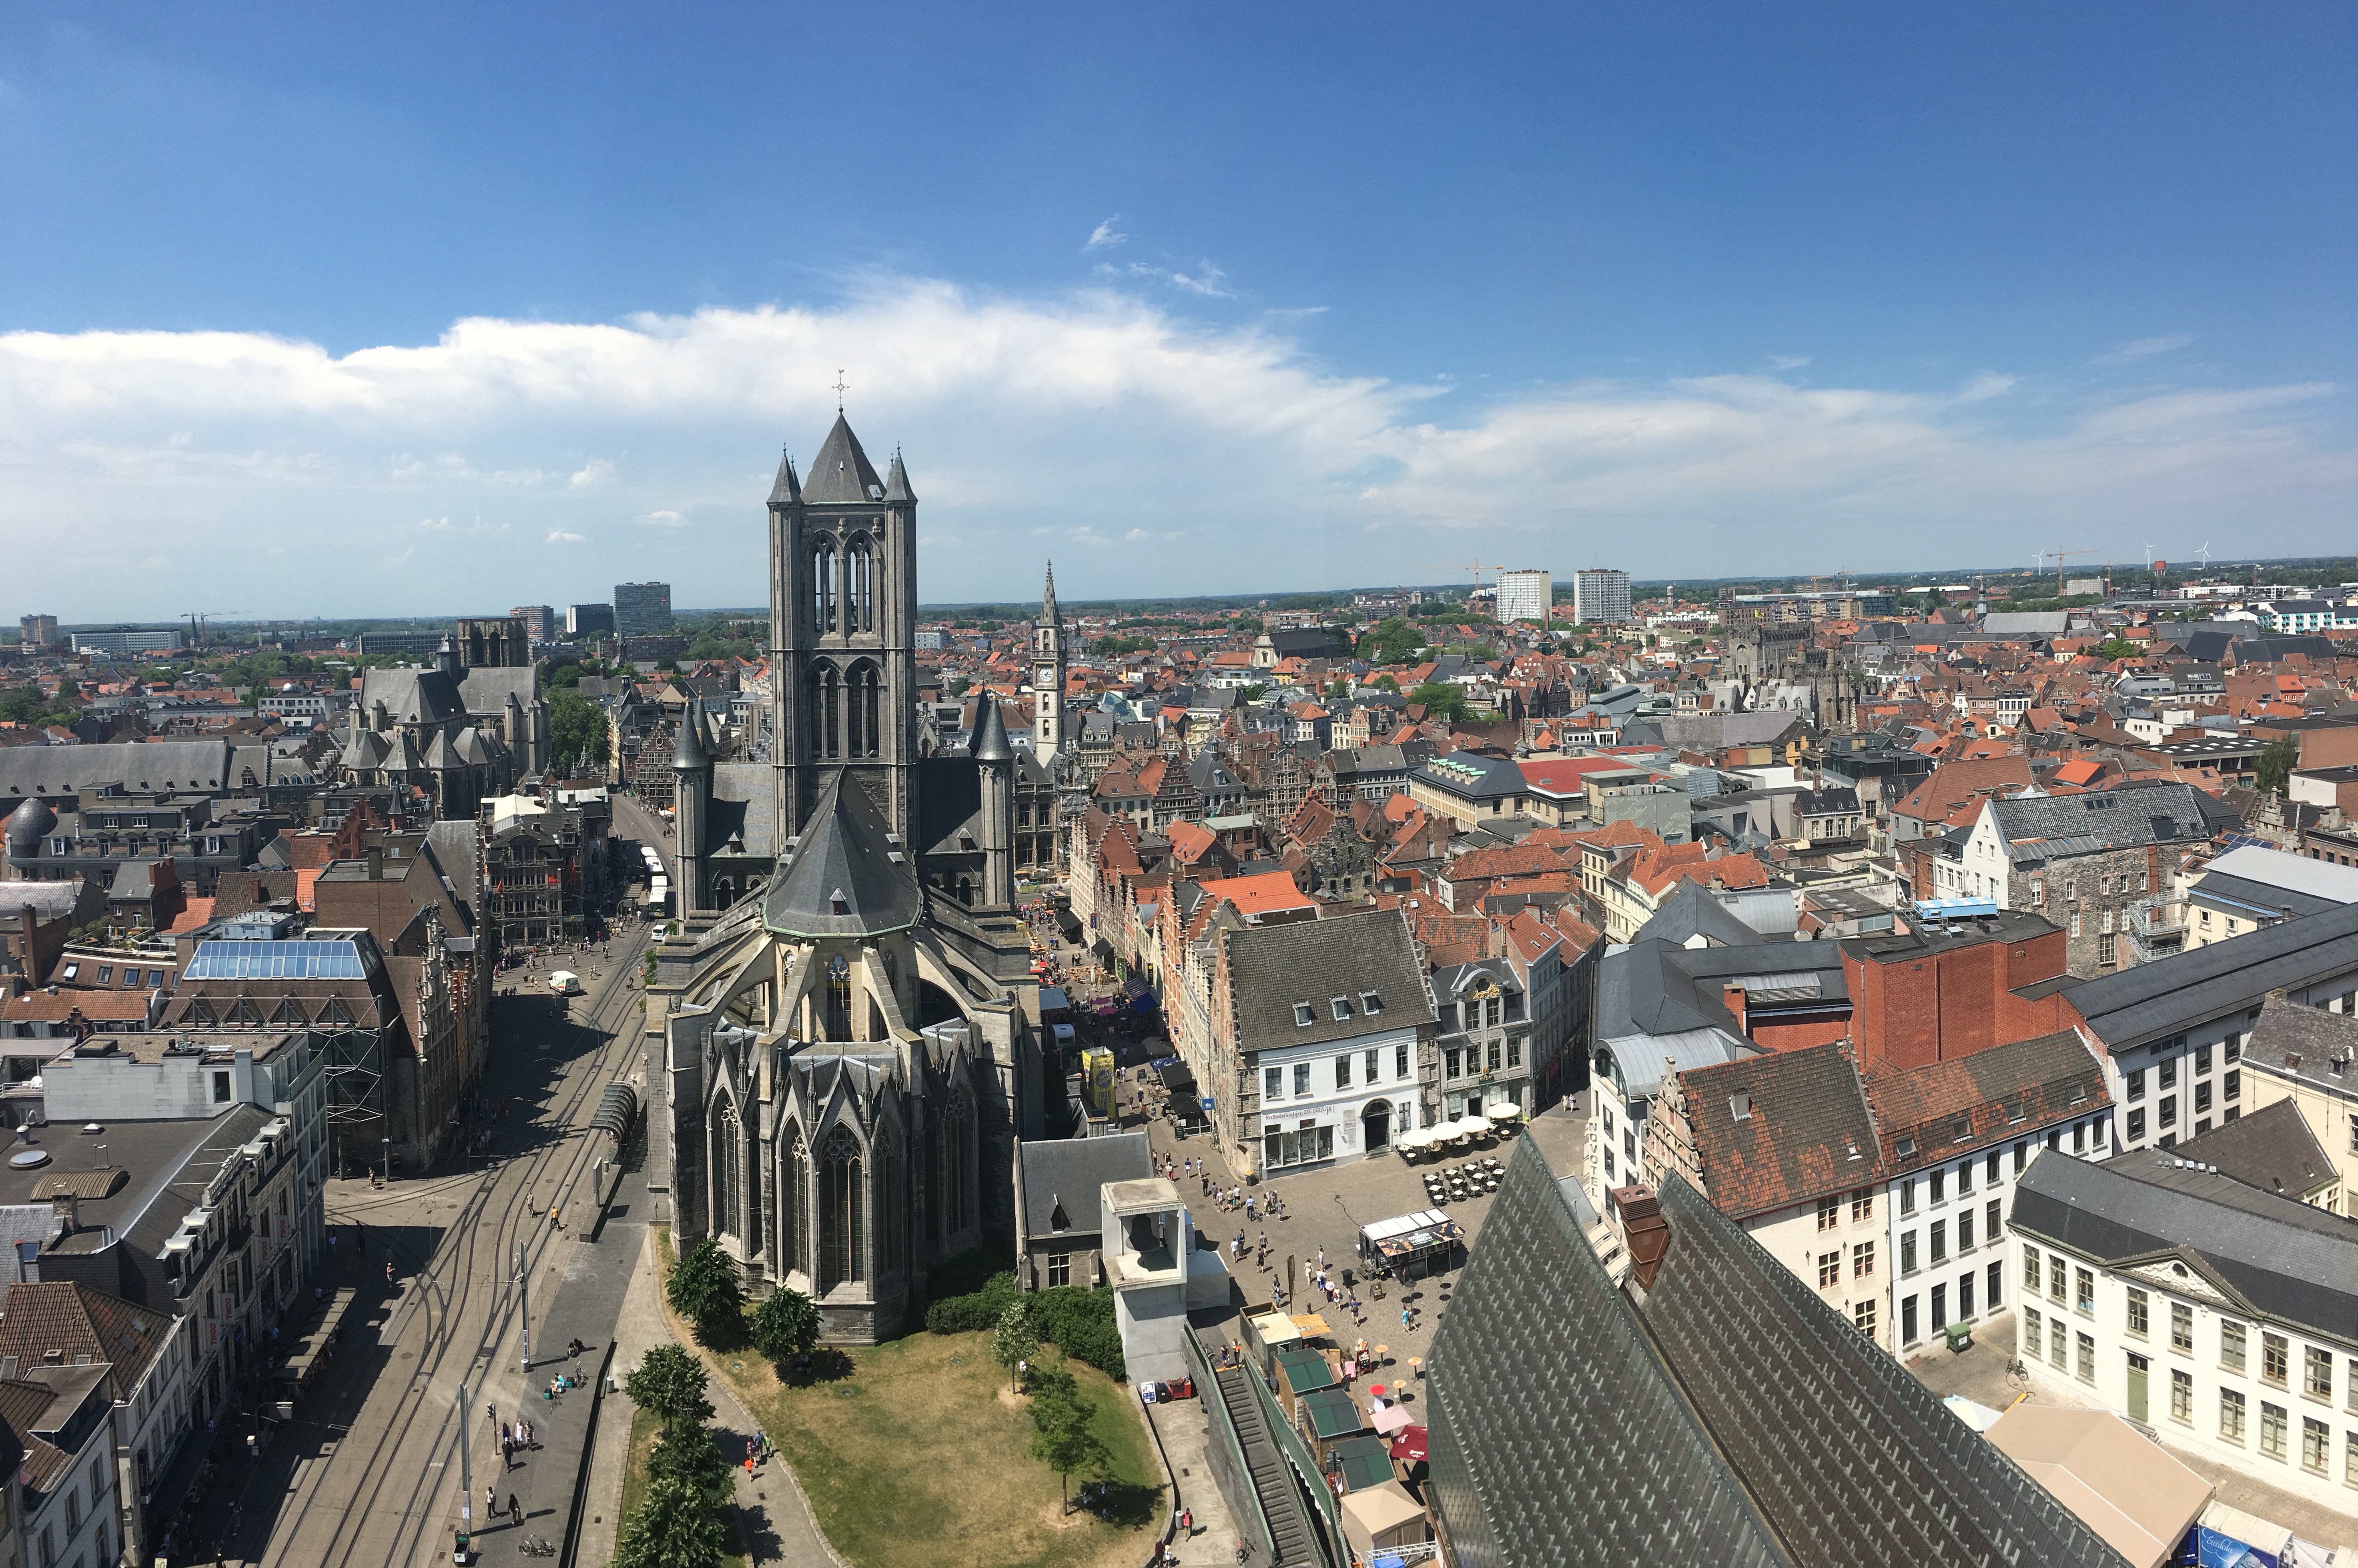 Views from the Ghent Belfry.